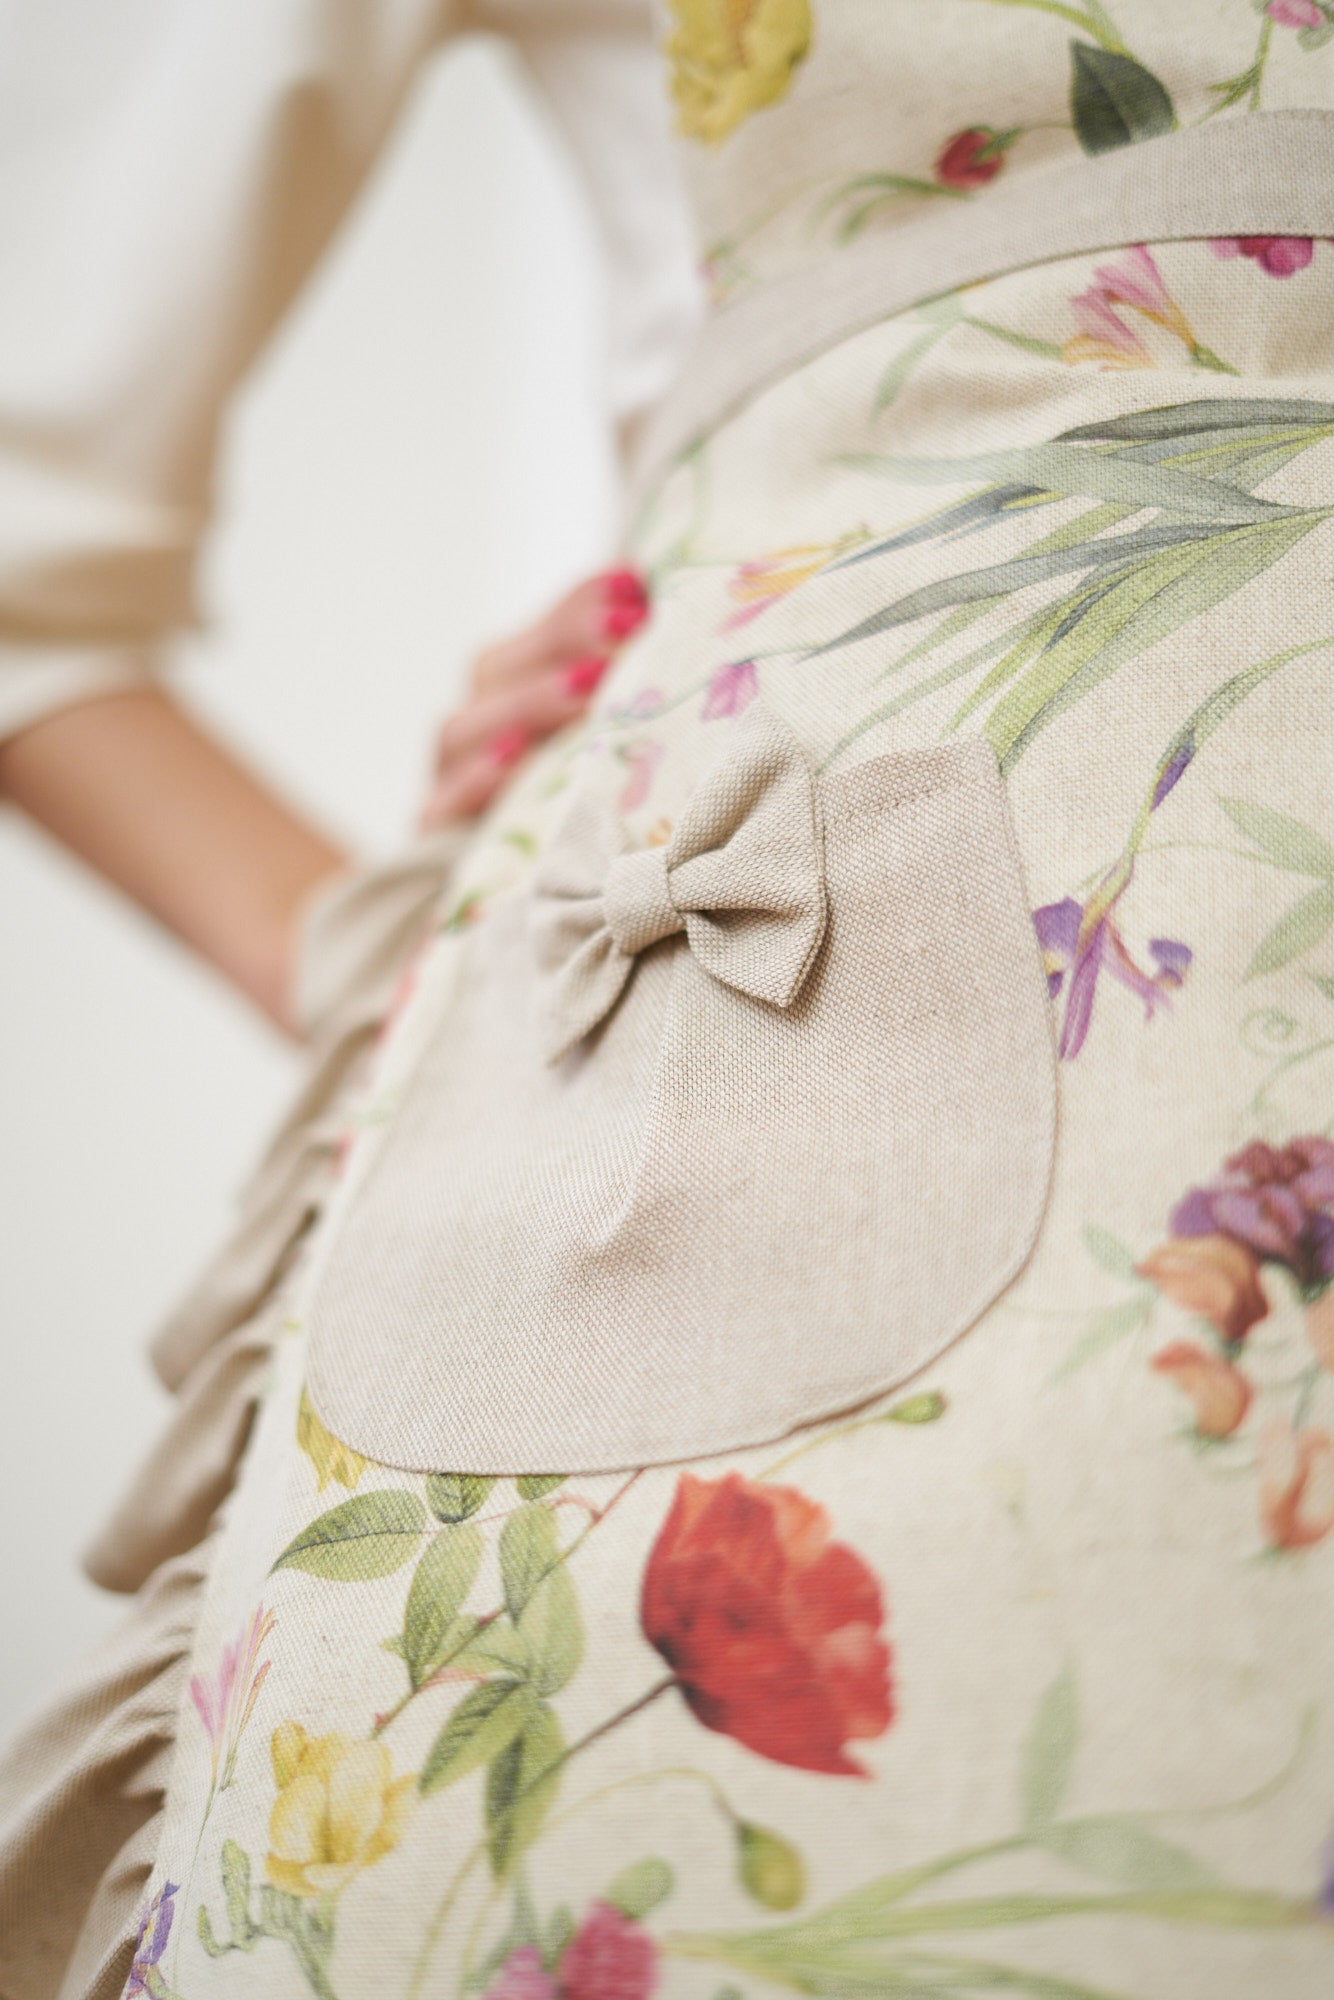 Ladies' Apron with Ruffles, Cotton-Linen Mix, Printed | Blossom